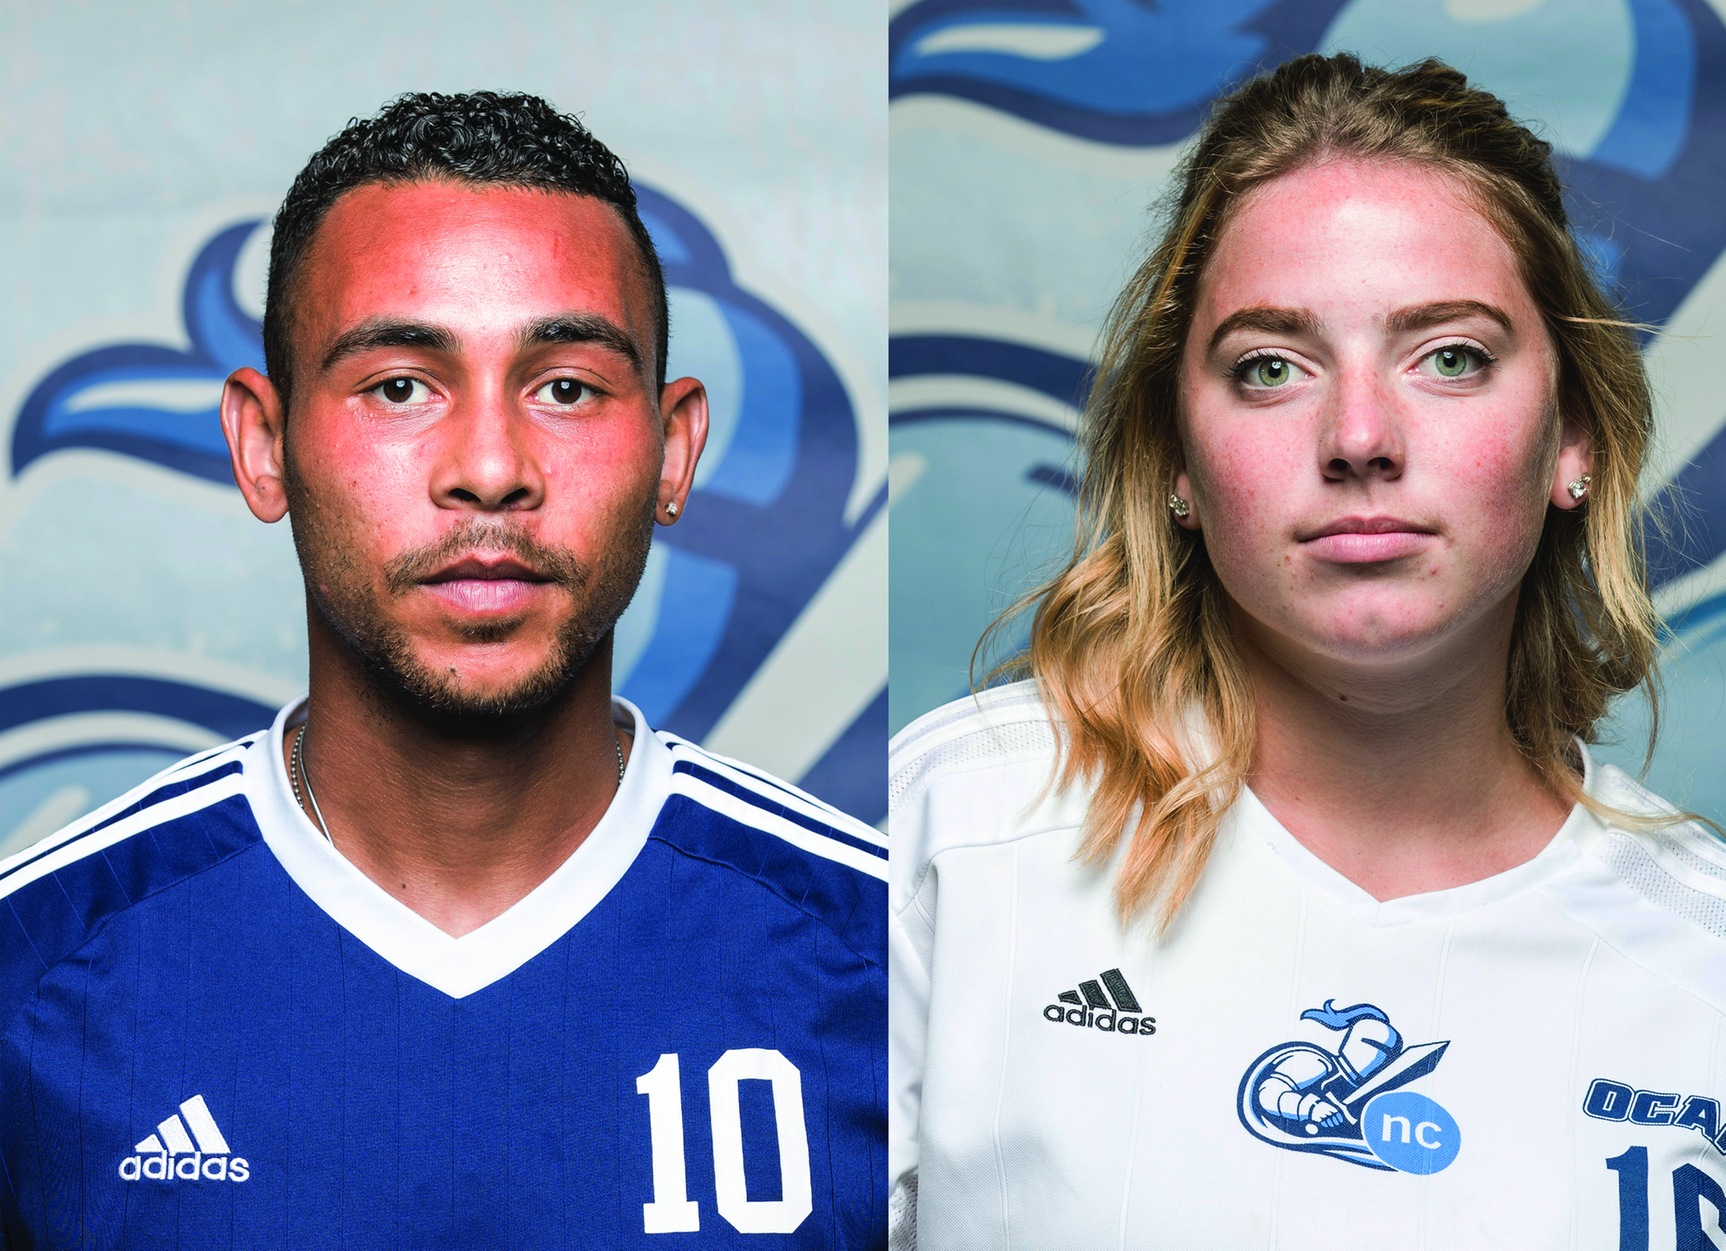 NEWS: Williams and Maecker named athletes of the week